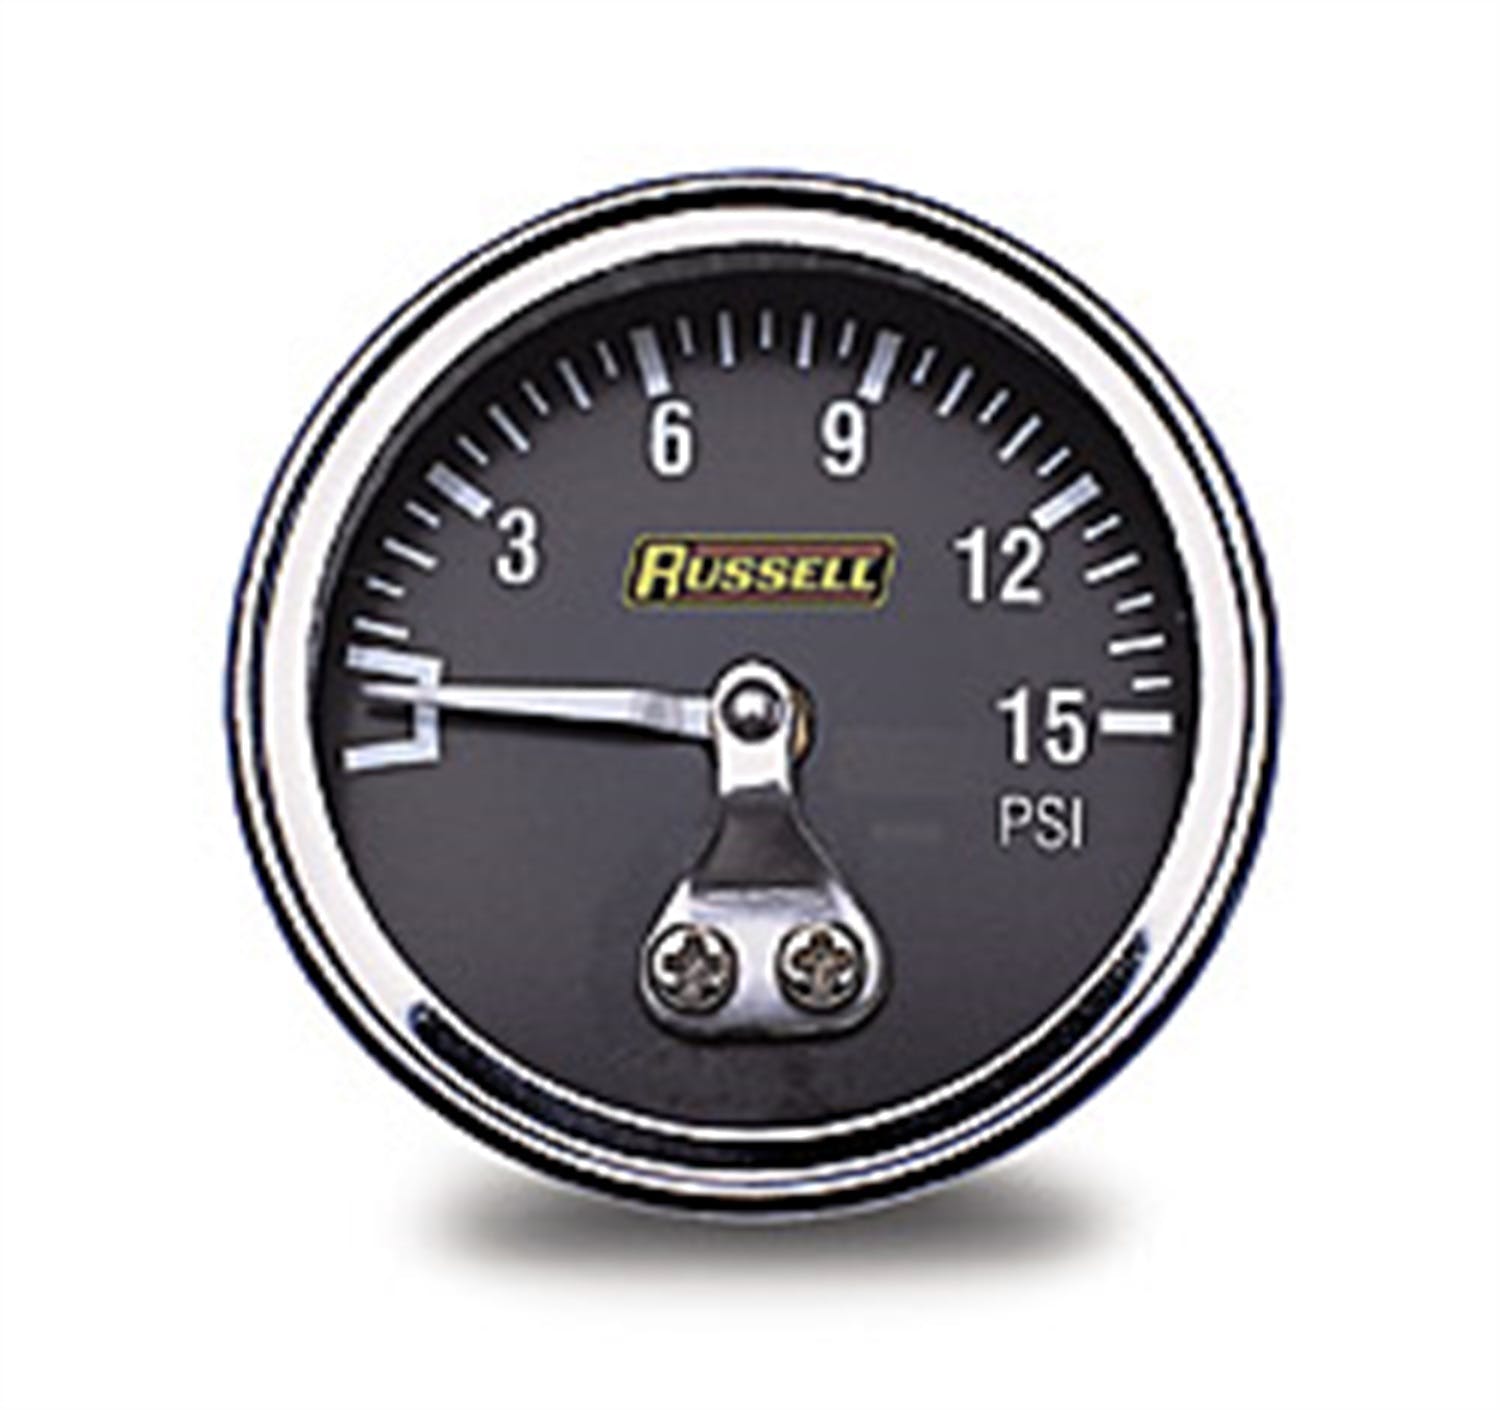 Russell 650350 Non Liquid Filled Gauge 0-15 PSI